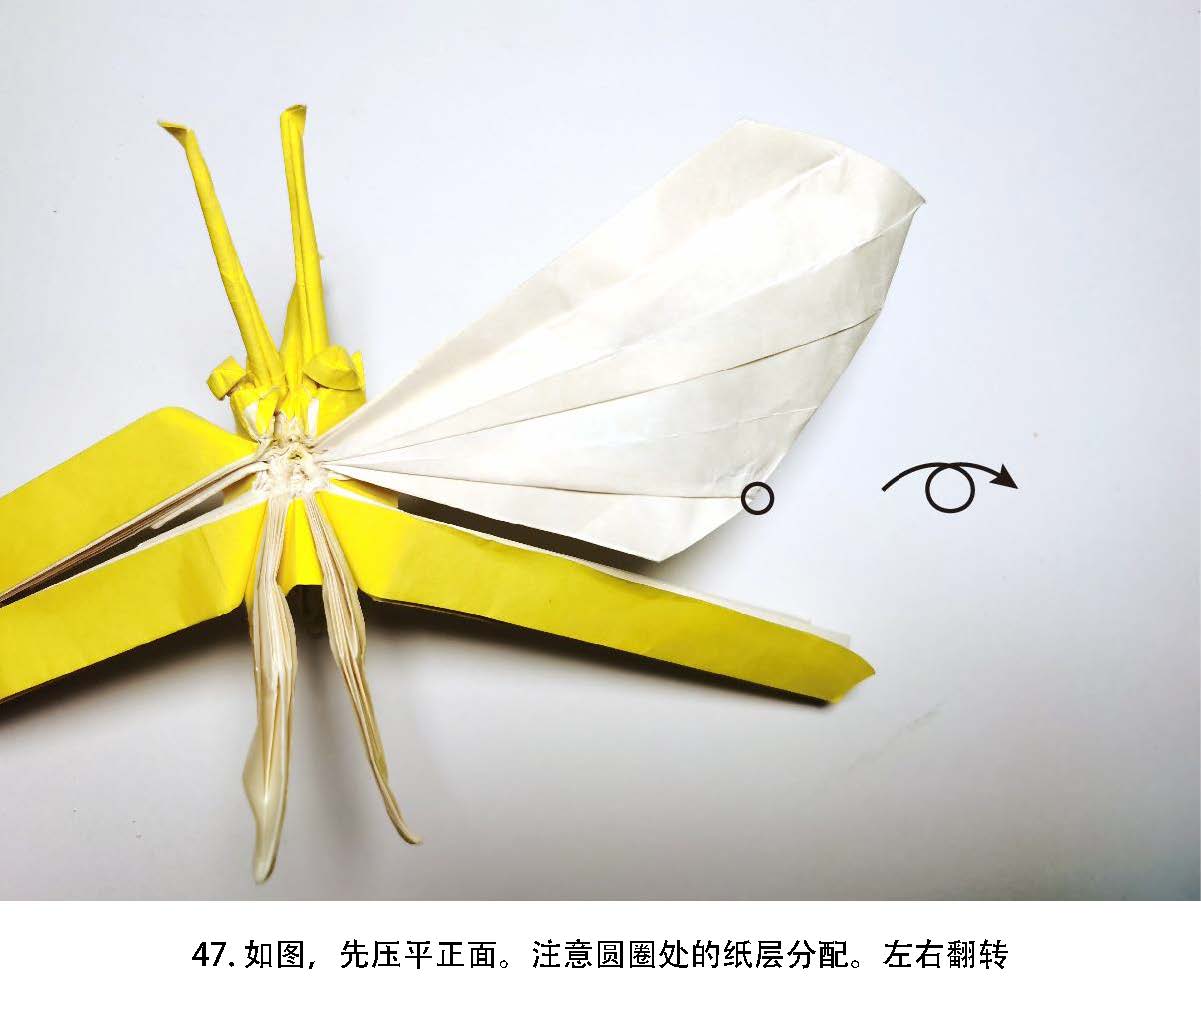 Butterfly by Tony Wang , Photodiagrams step by step. 140+steps